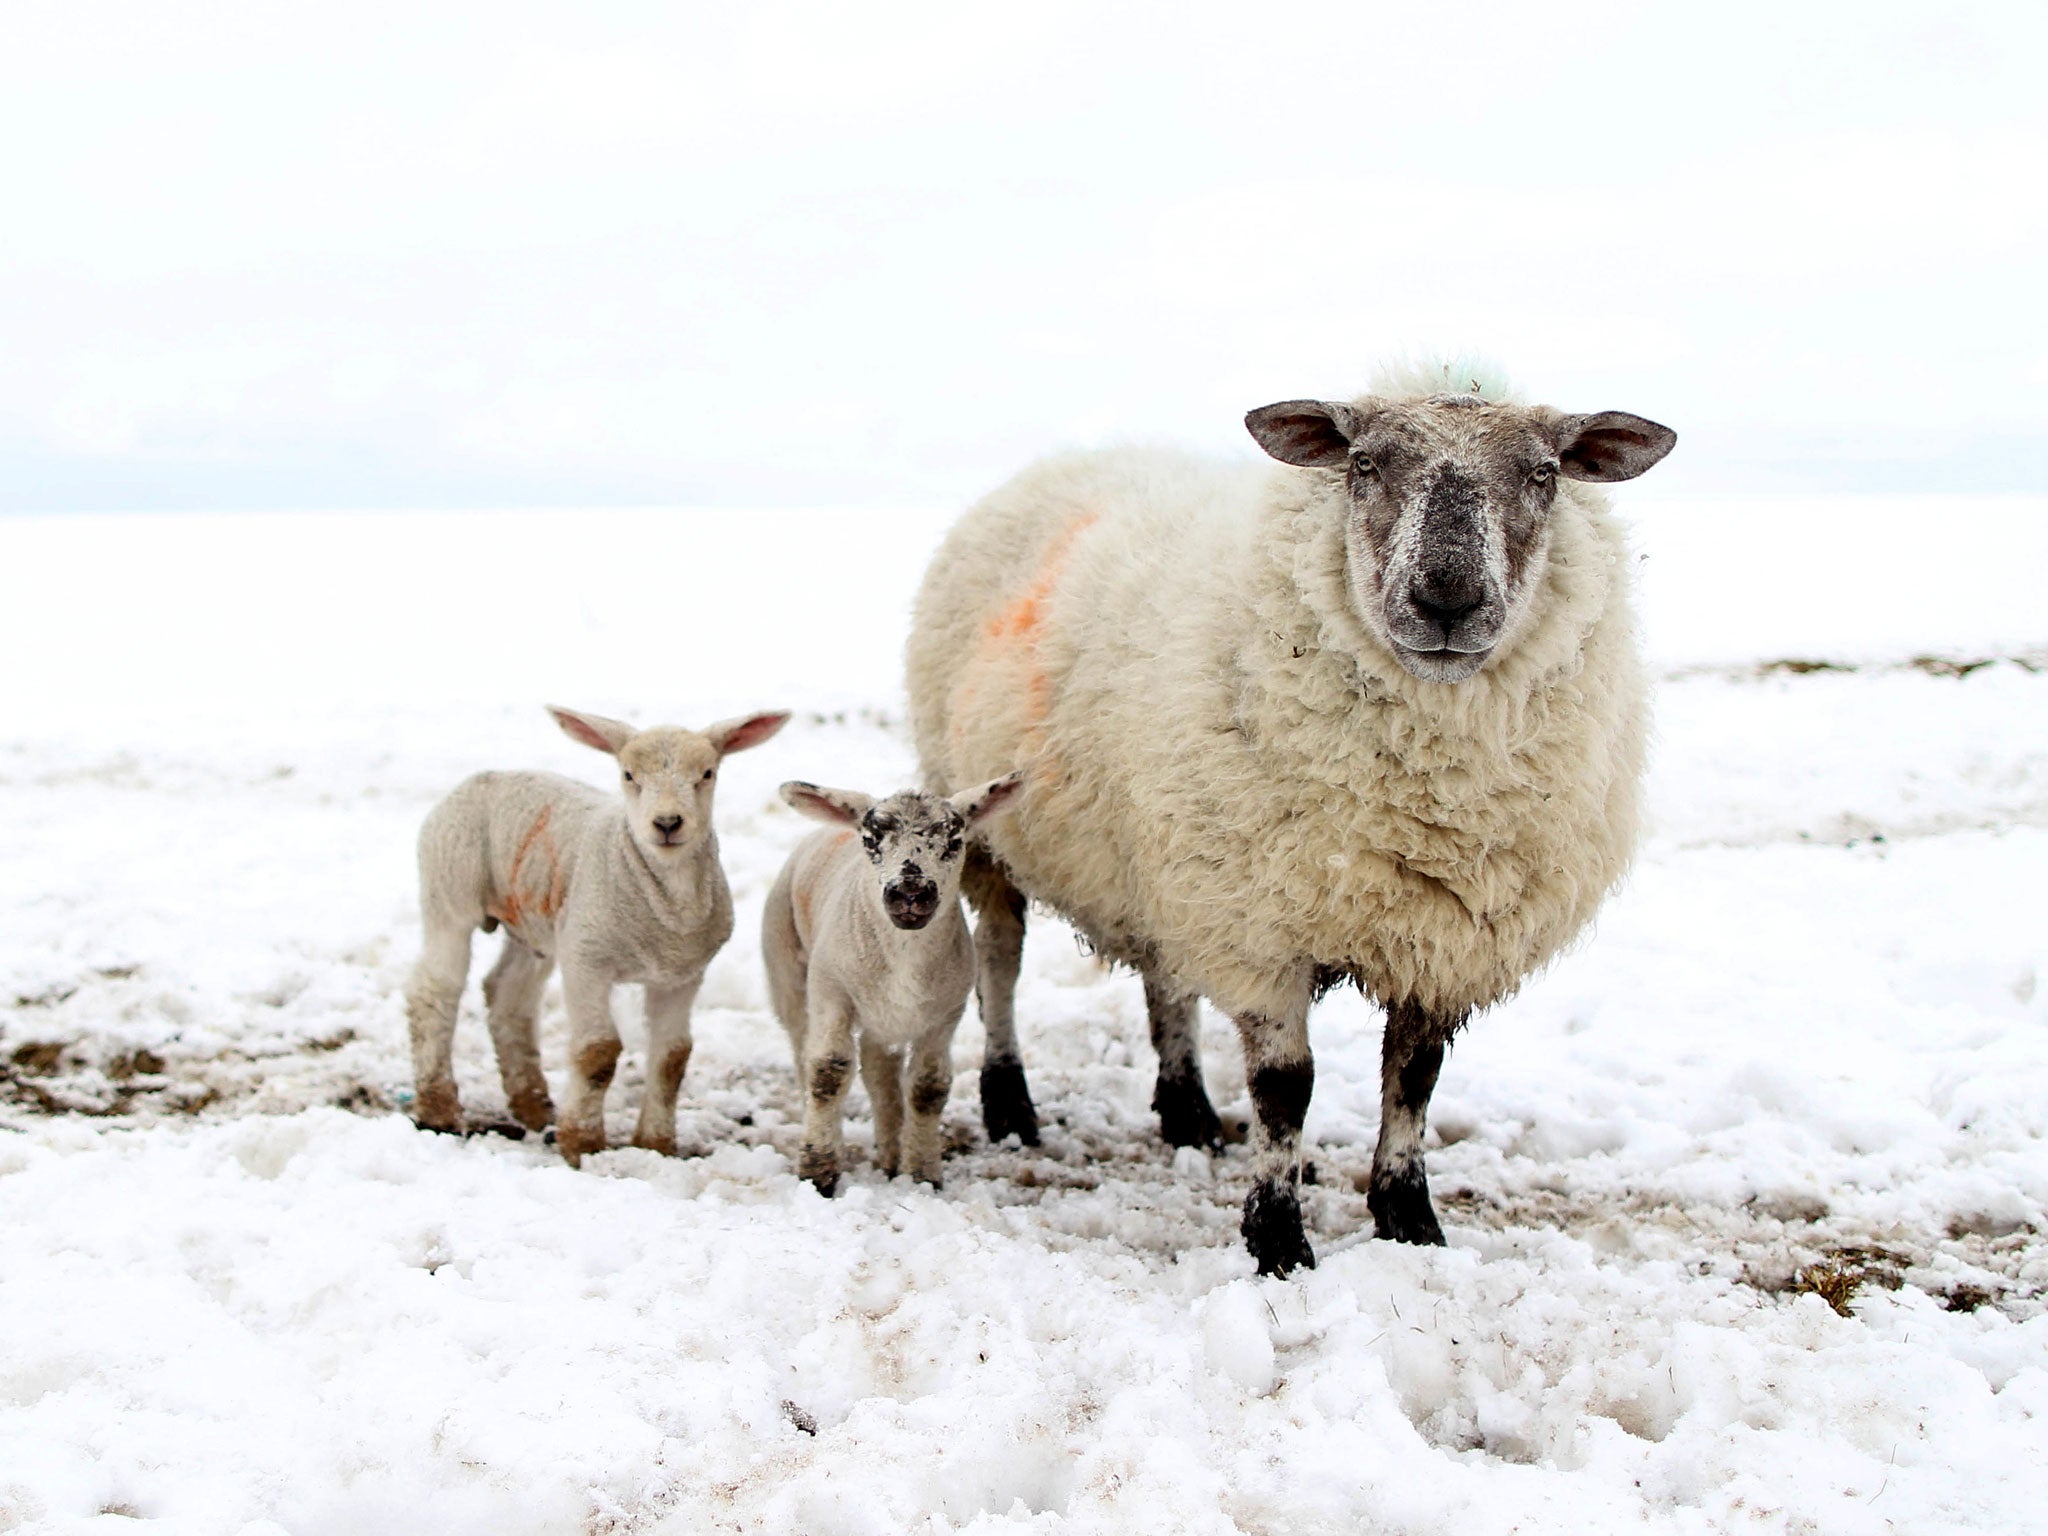 A sheep and her lambs in Northern Ireland, where up to 10,000 animals were buried in snowdrifts